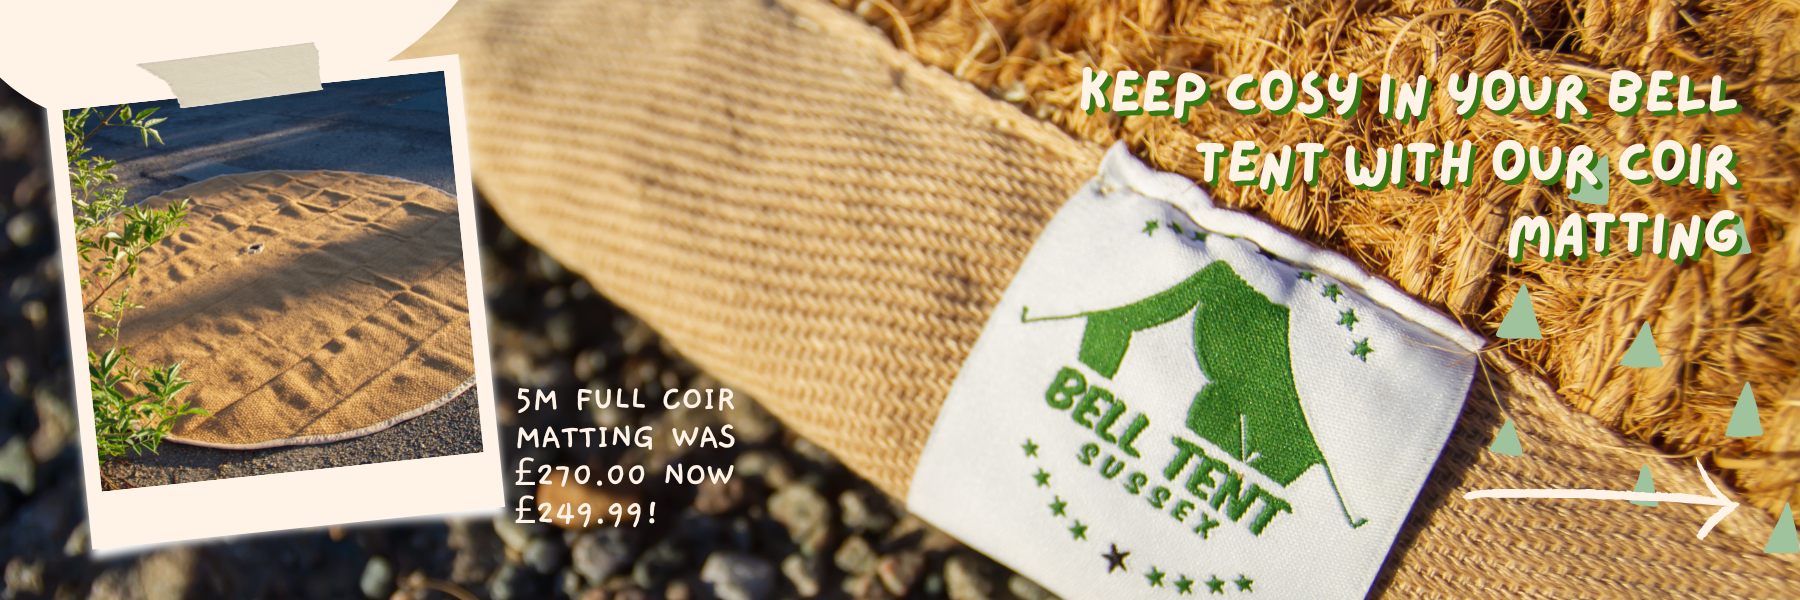 keep cosy in your bell tent with our coir matting